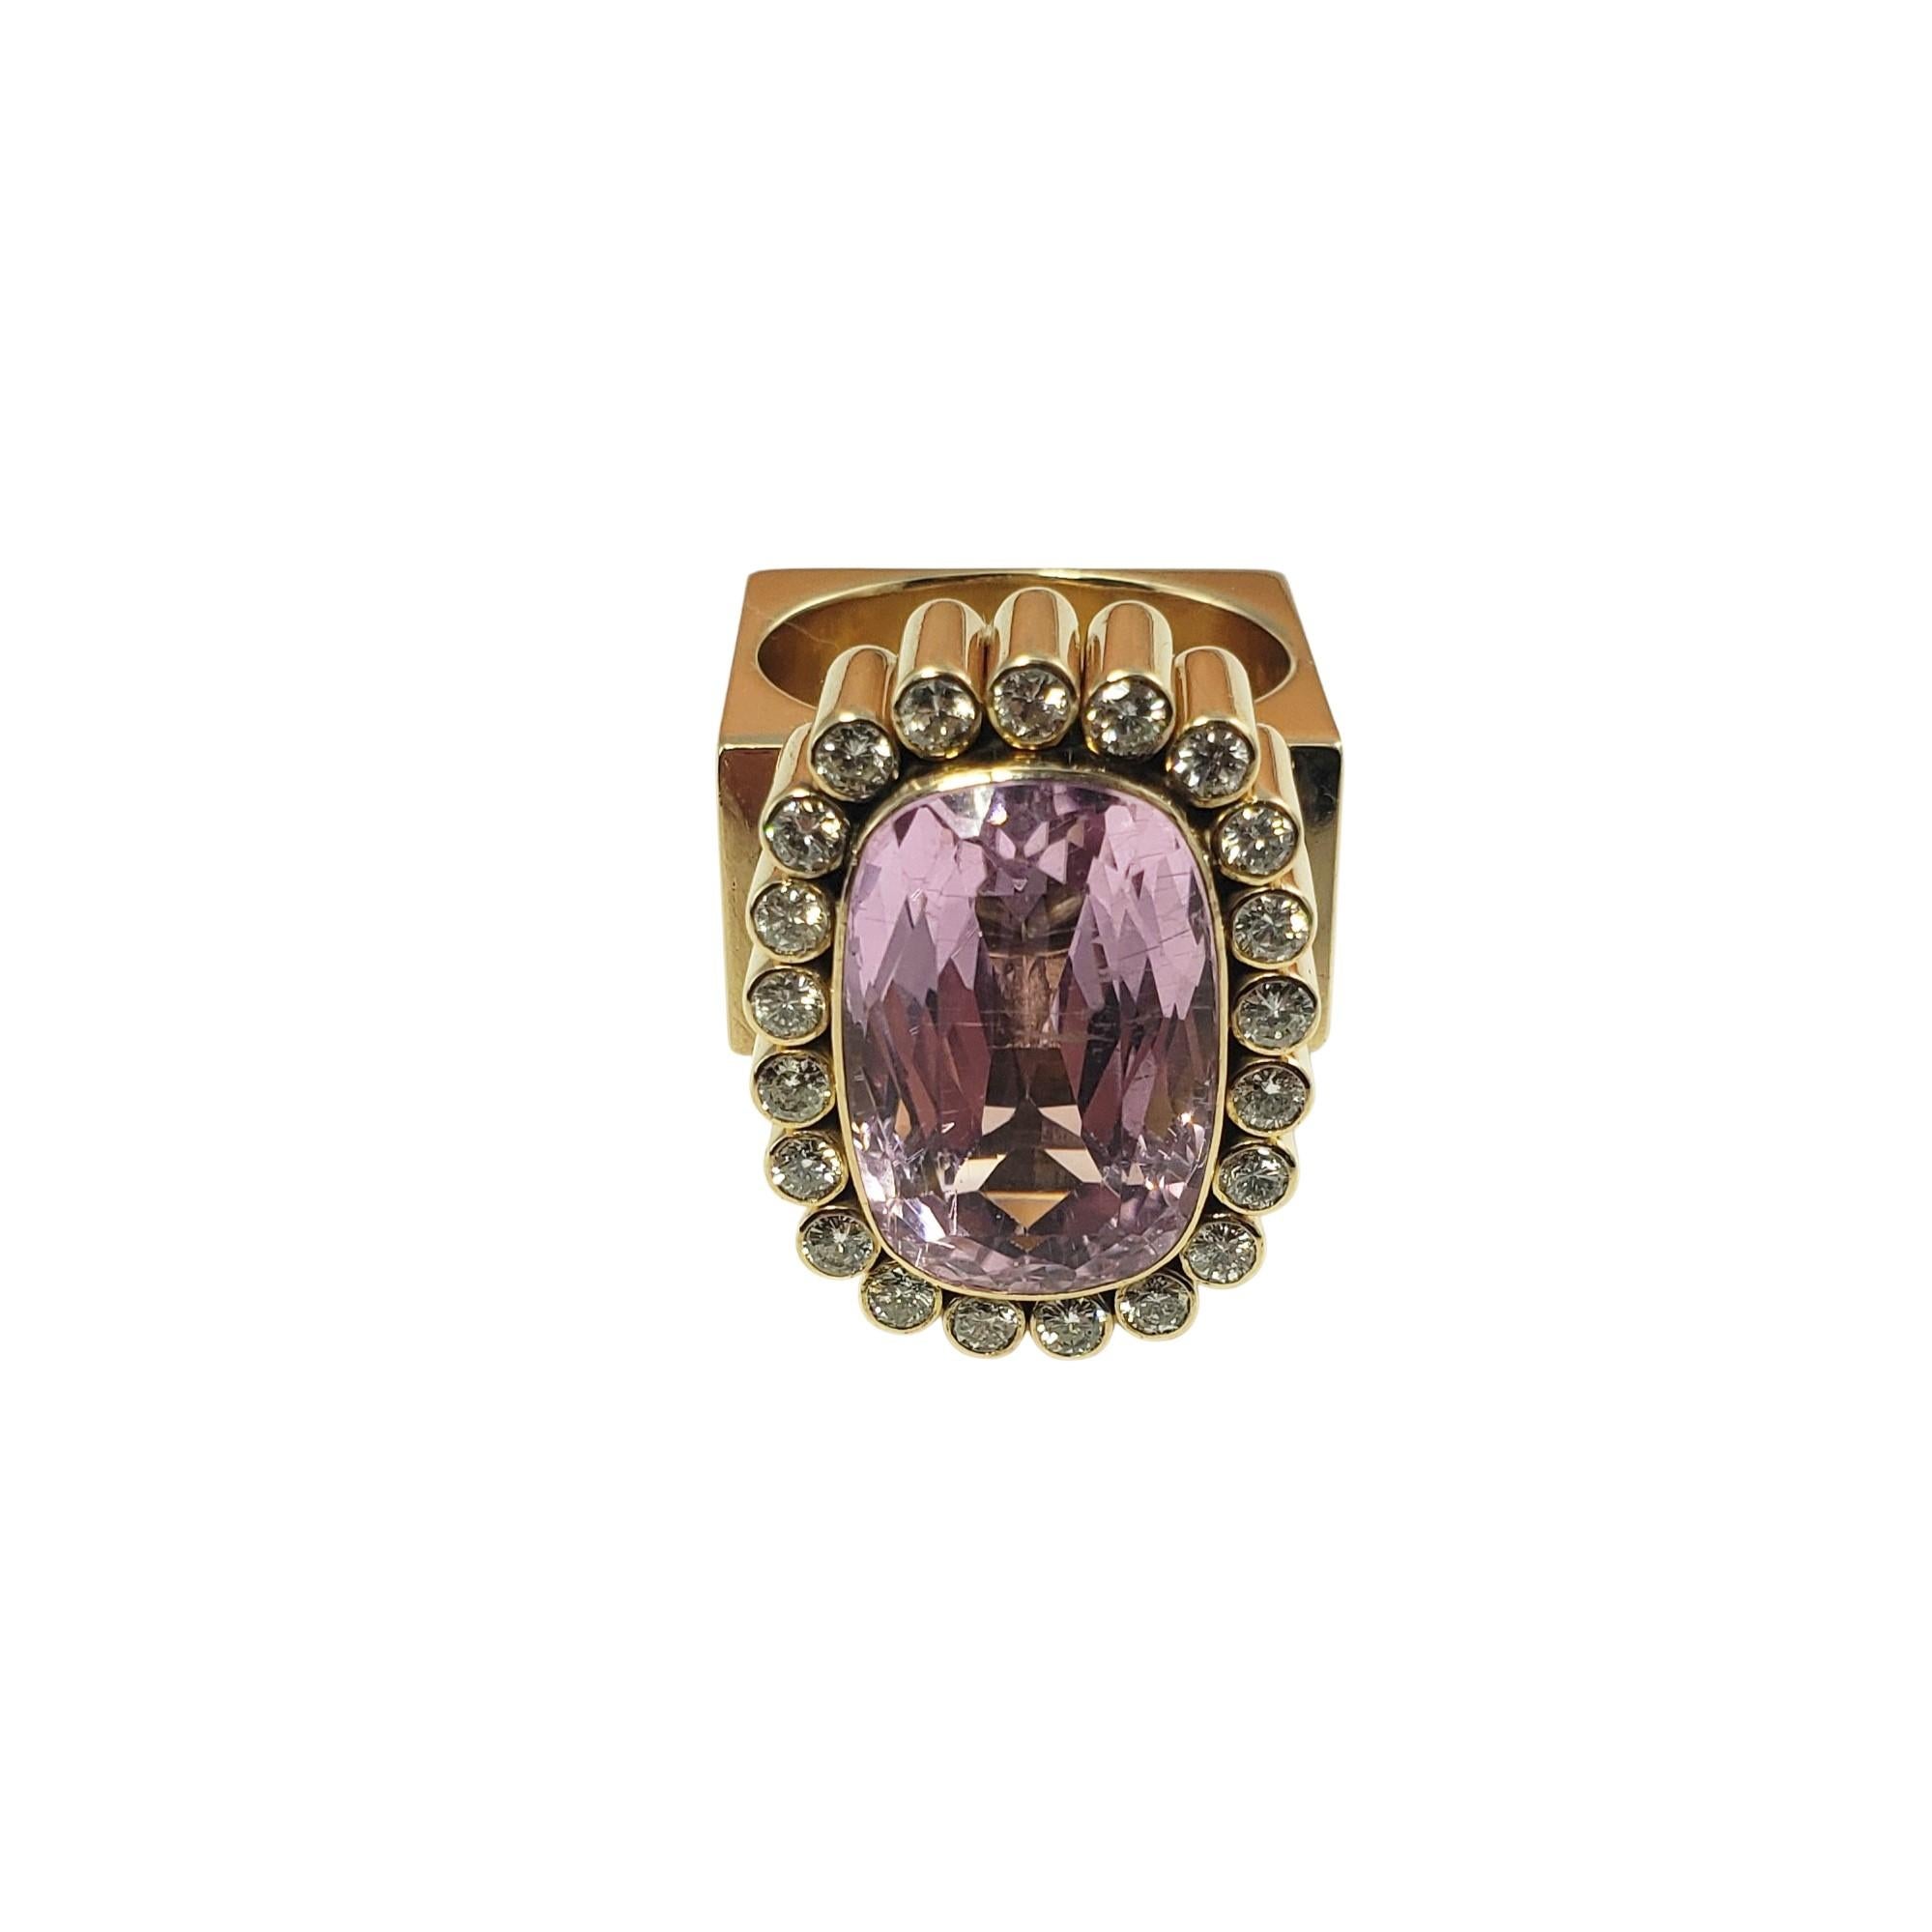 14 Karat Yellow Gold Amethyst and Diamond Ring Size 9.5 GAI Certified-

This stunning ring features one cushion cut amethyst (20 mm x 12.5 mm) and 21 round brilliant cut diamonds set in beautifully detailed 14K yellow gold.  Top of ring measures 25